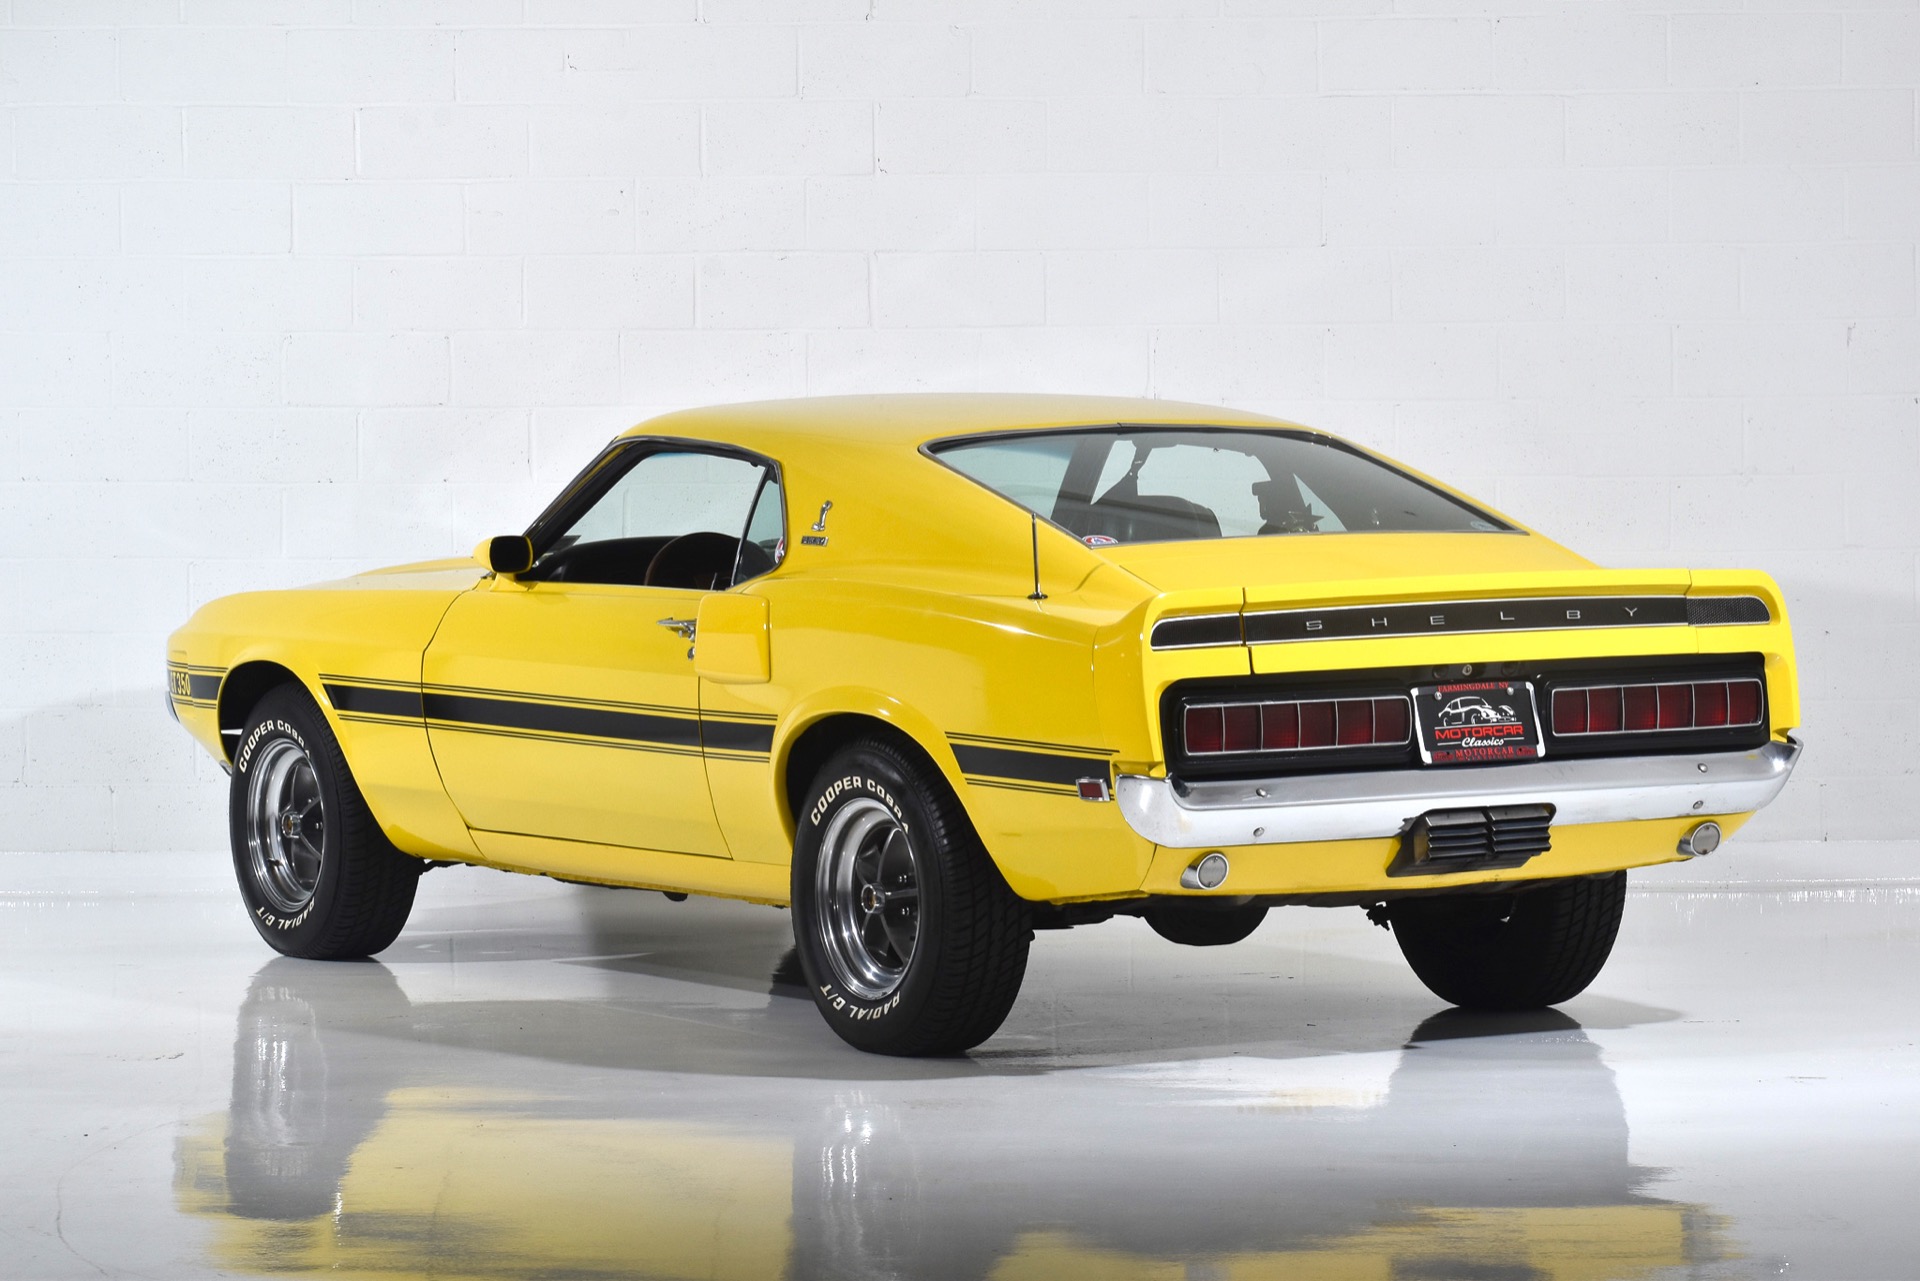 Used 1969 Shelby GT350 For Sale ($84,900) | Motorcar Classics Stock #1526